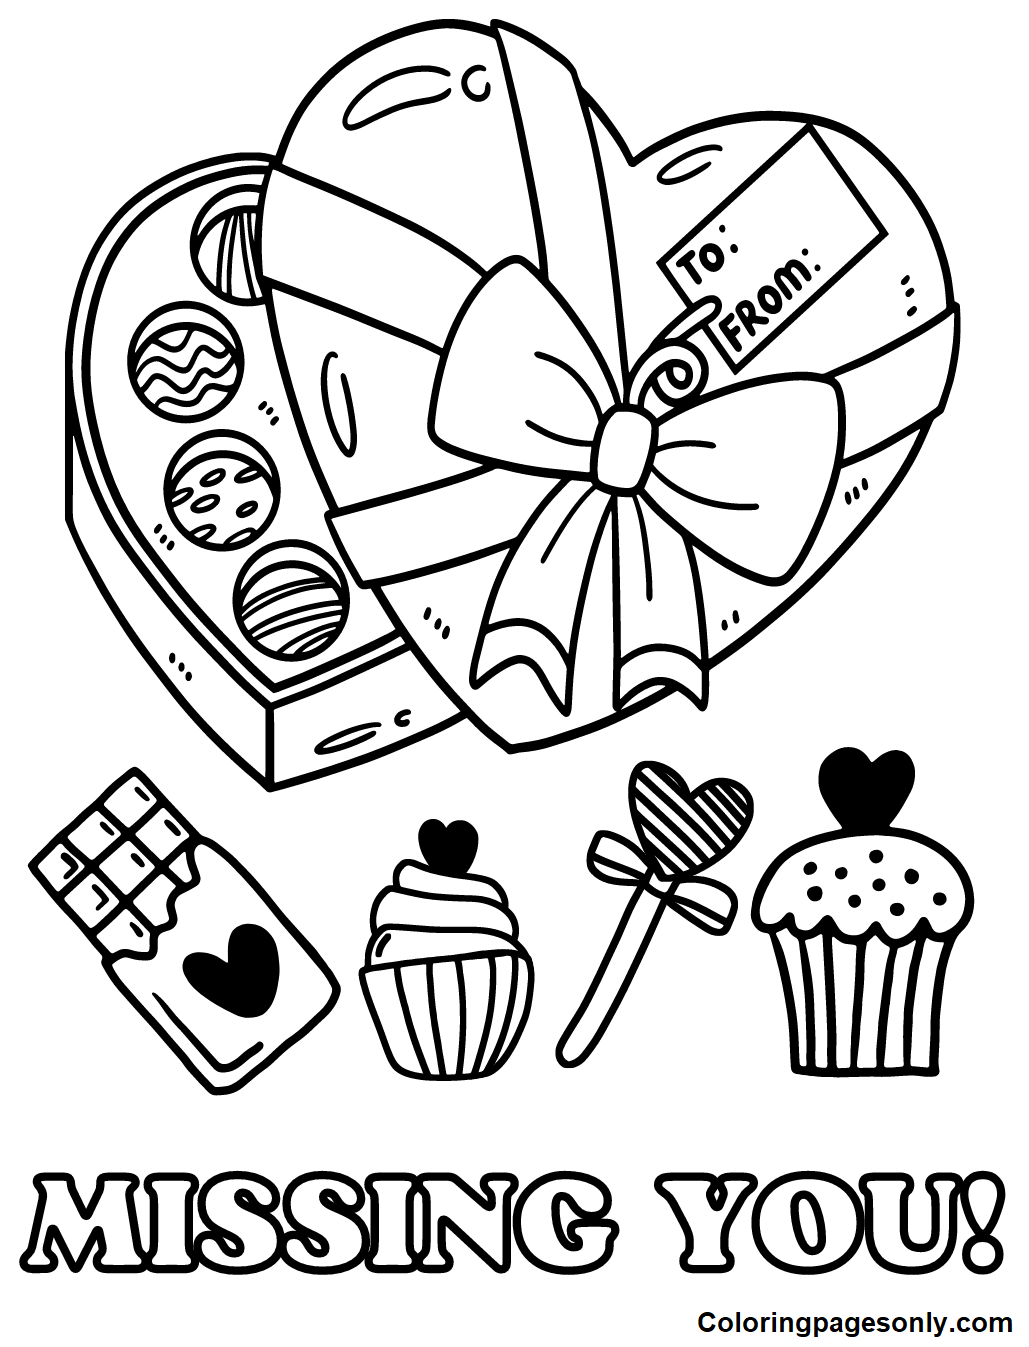 Missing you Coloring Pages